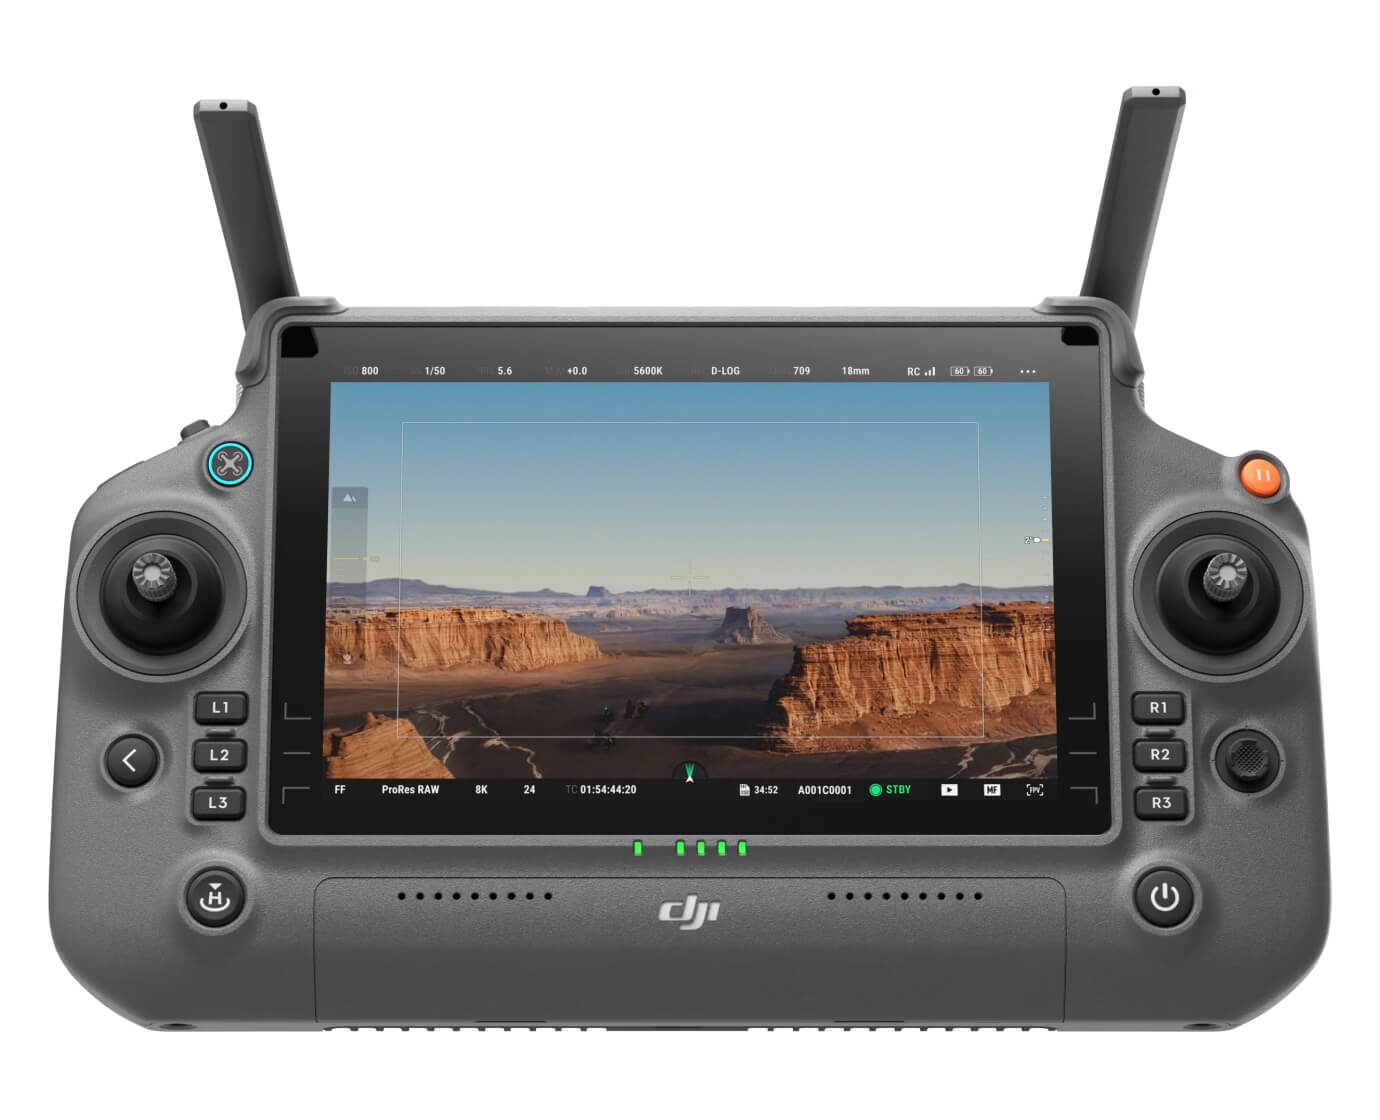 DJI Inspire 3, users can achieve highly accurate positioning by activating an RTK network [5] or setting up